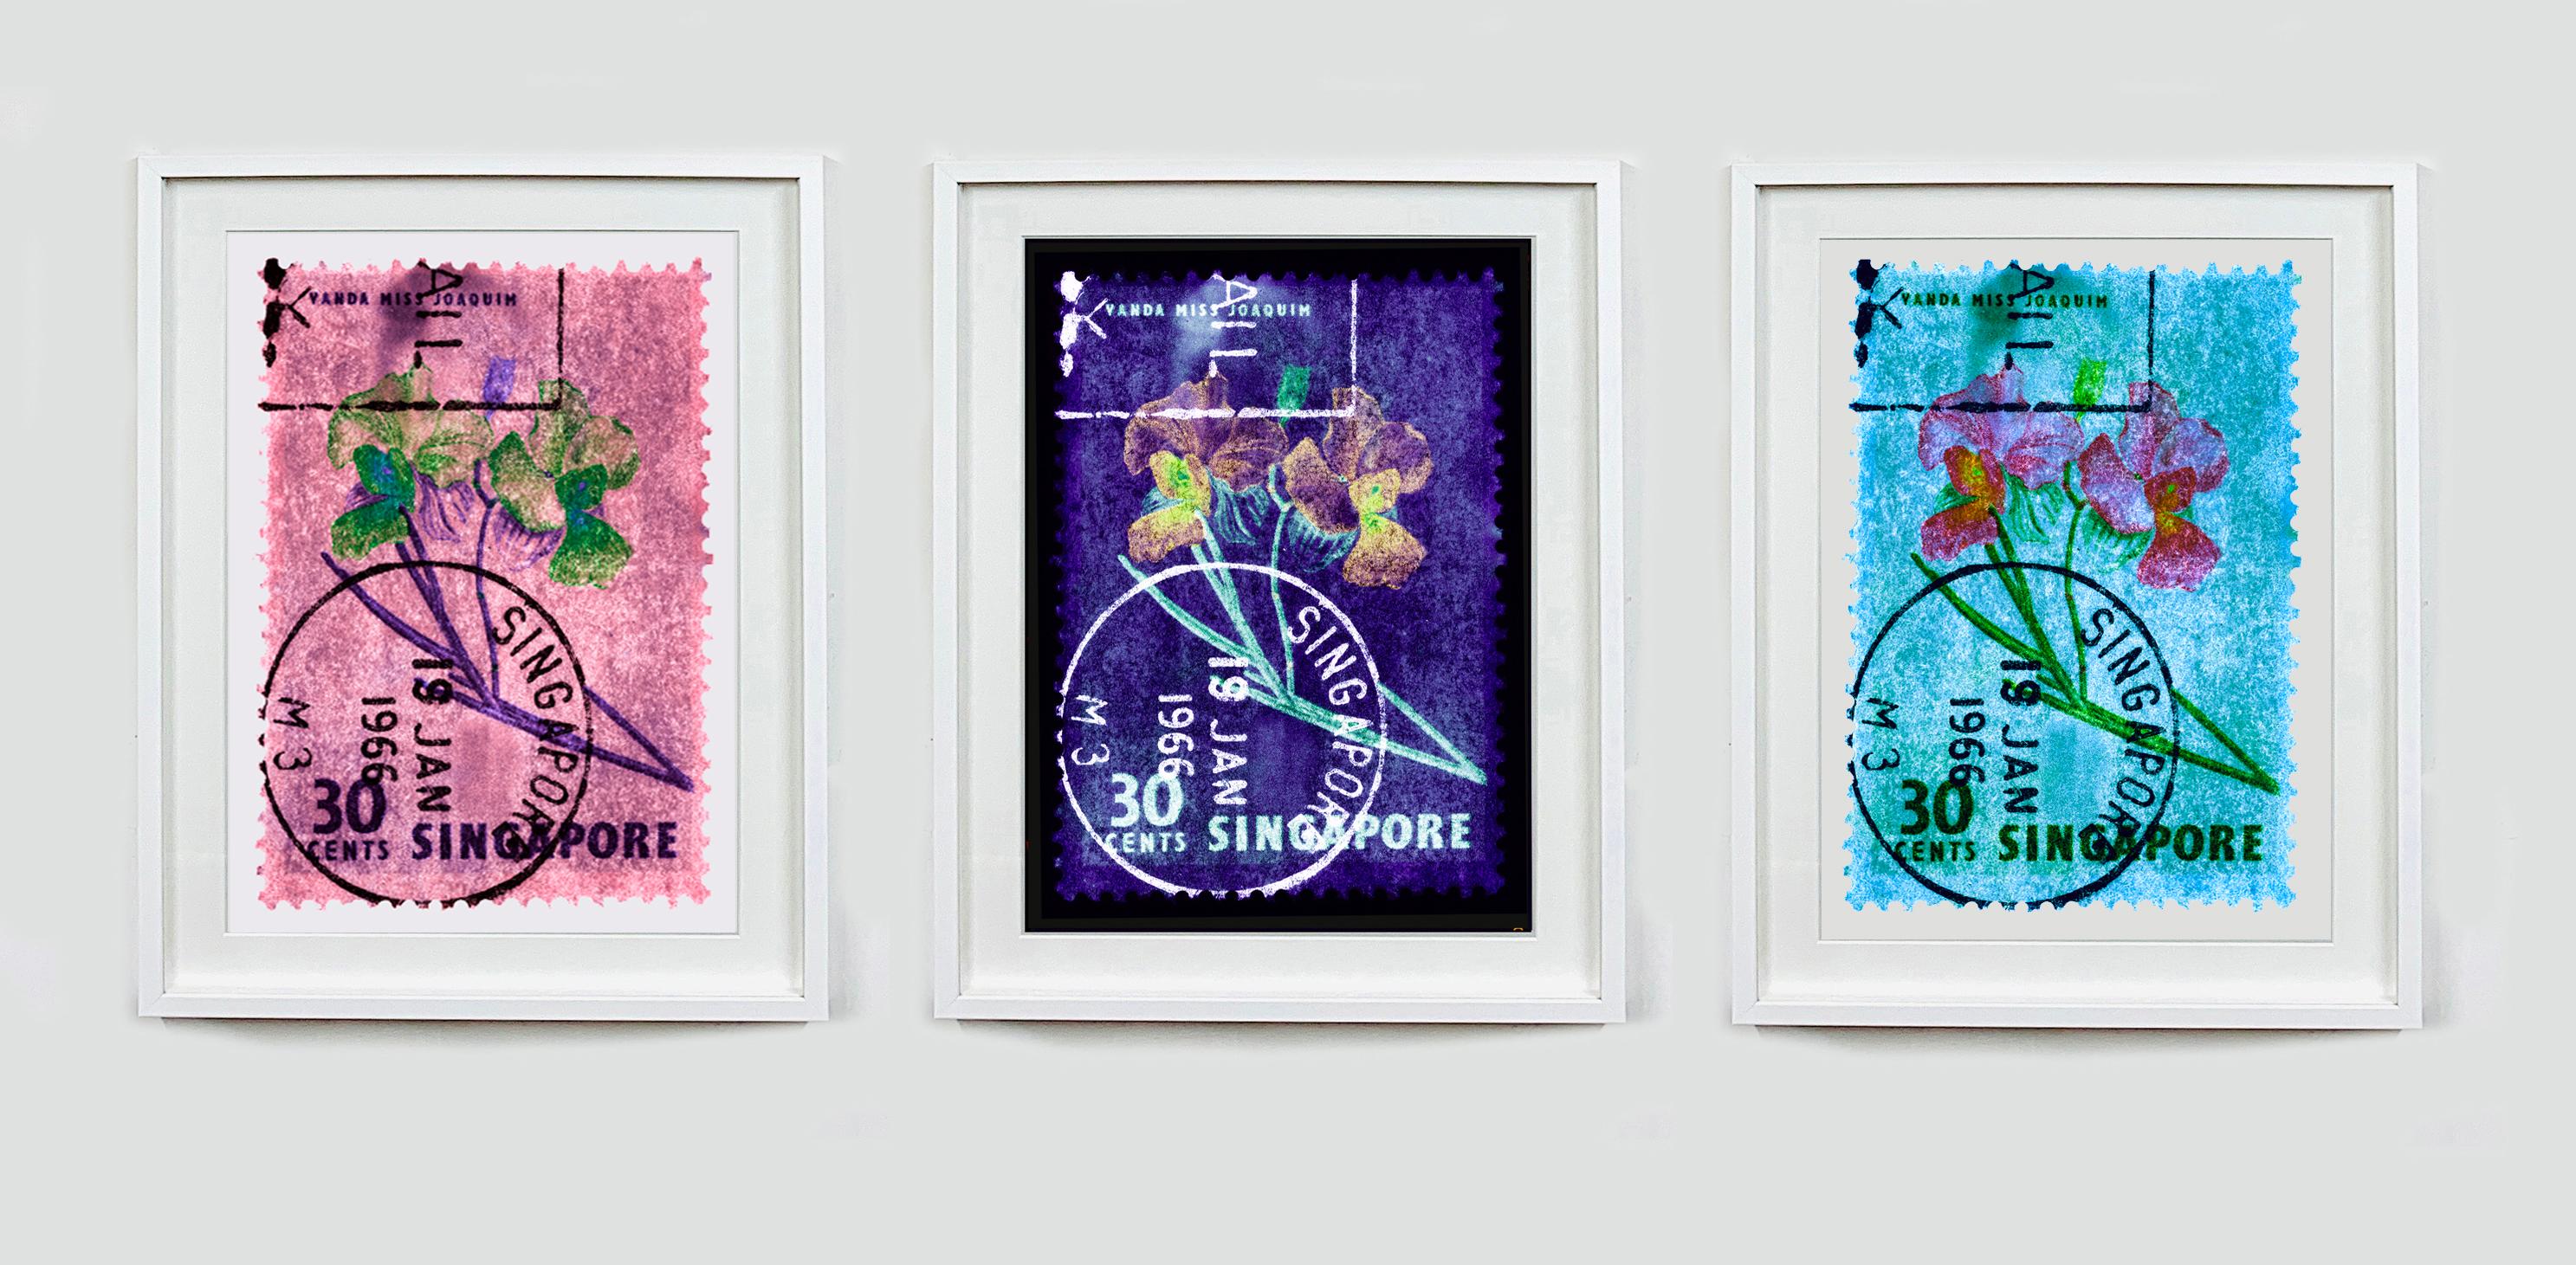 Singapore Stamp Collection, 30c Singapore Orchid Blue - Floral color photo - Conceptual Print by Heidler & Heeps